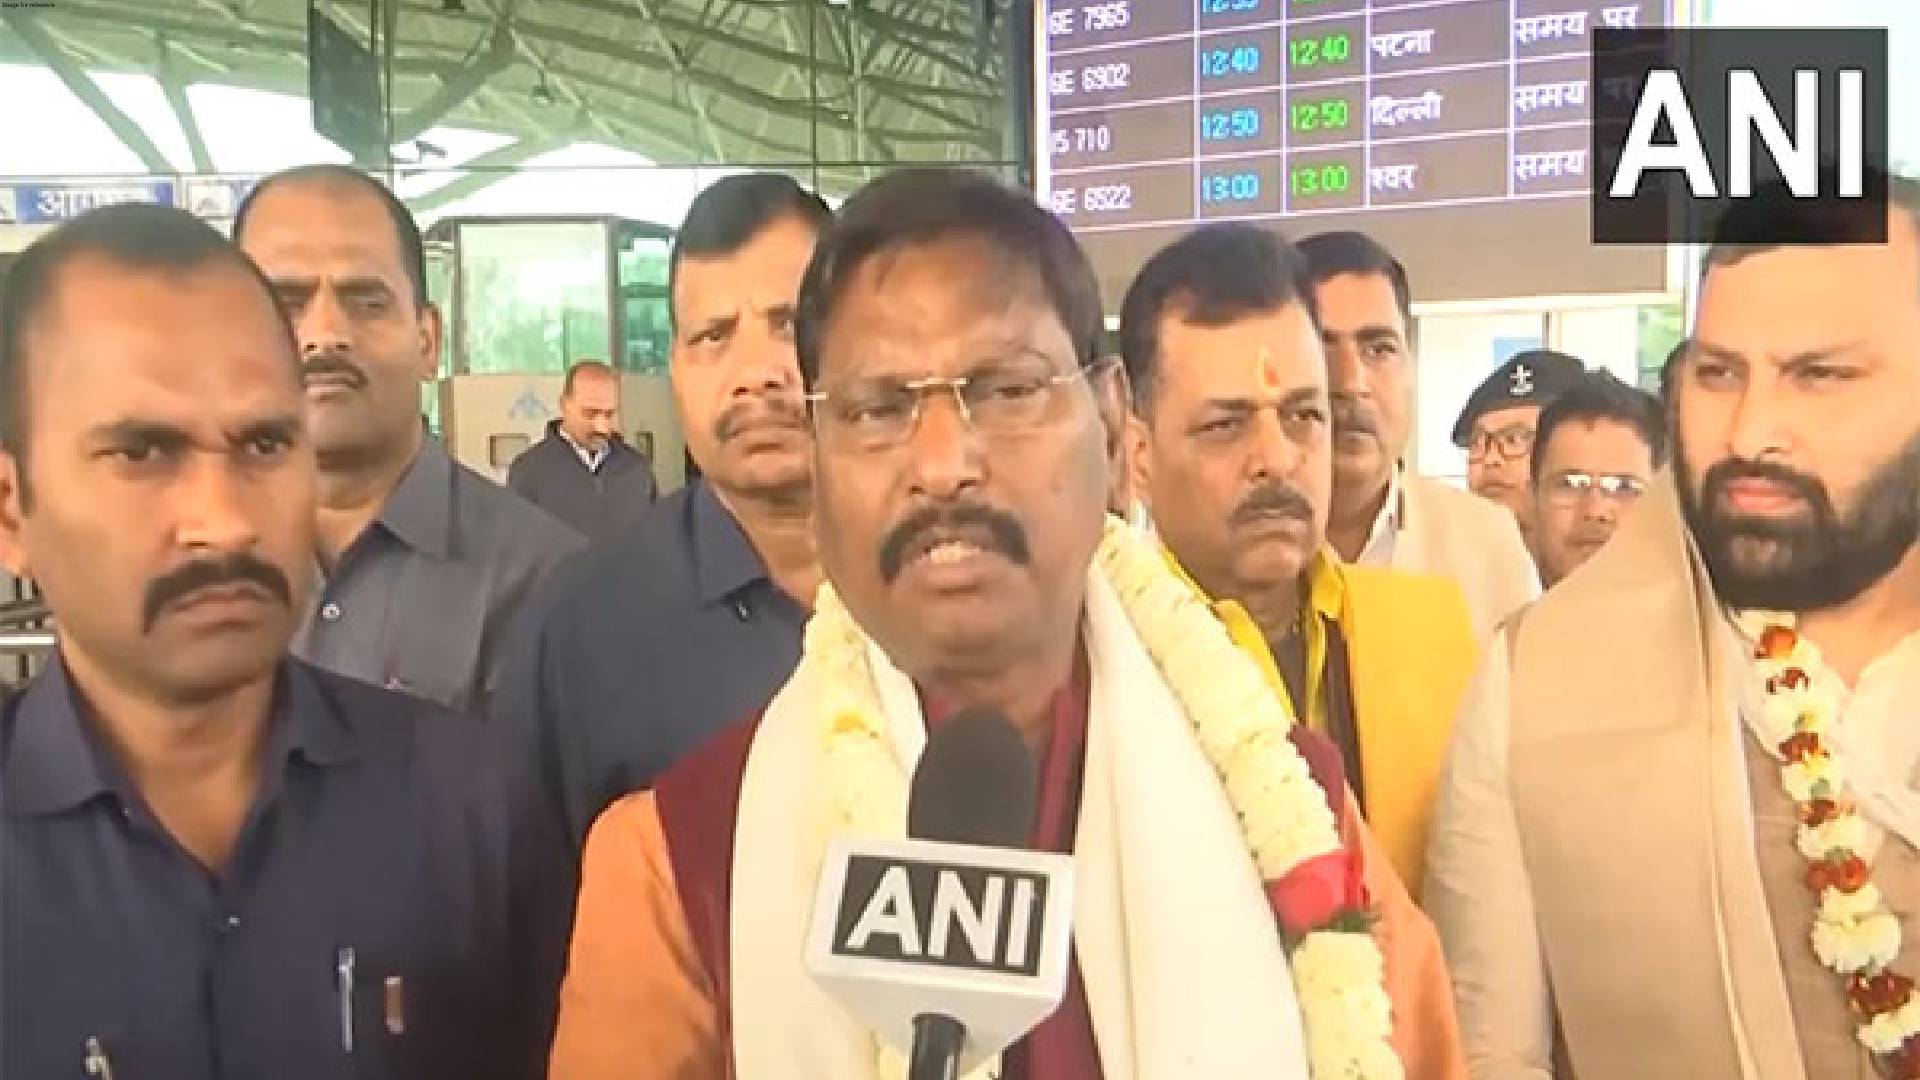 More efforts to be put in from both sides for consensus: Union Minister Arjun Munda on farmers' protest